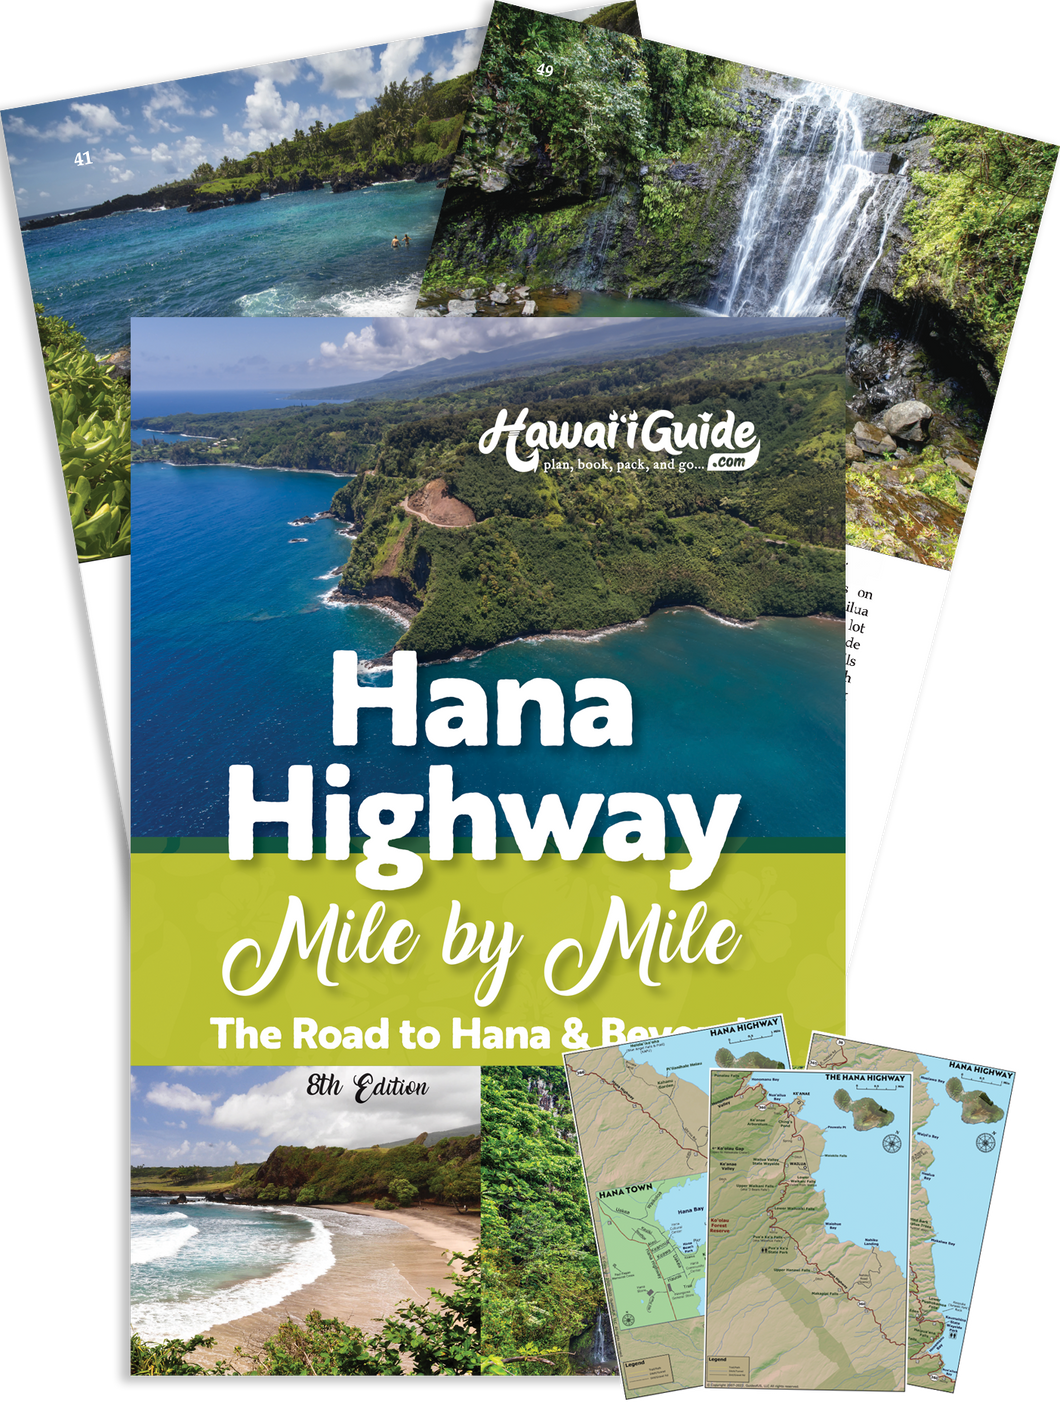 Hana Highway - Mile by Mile 8th Edition